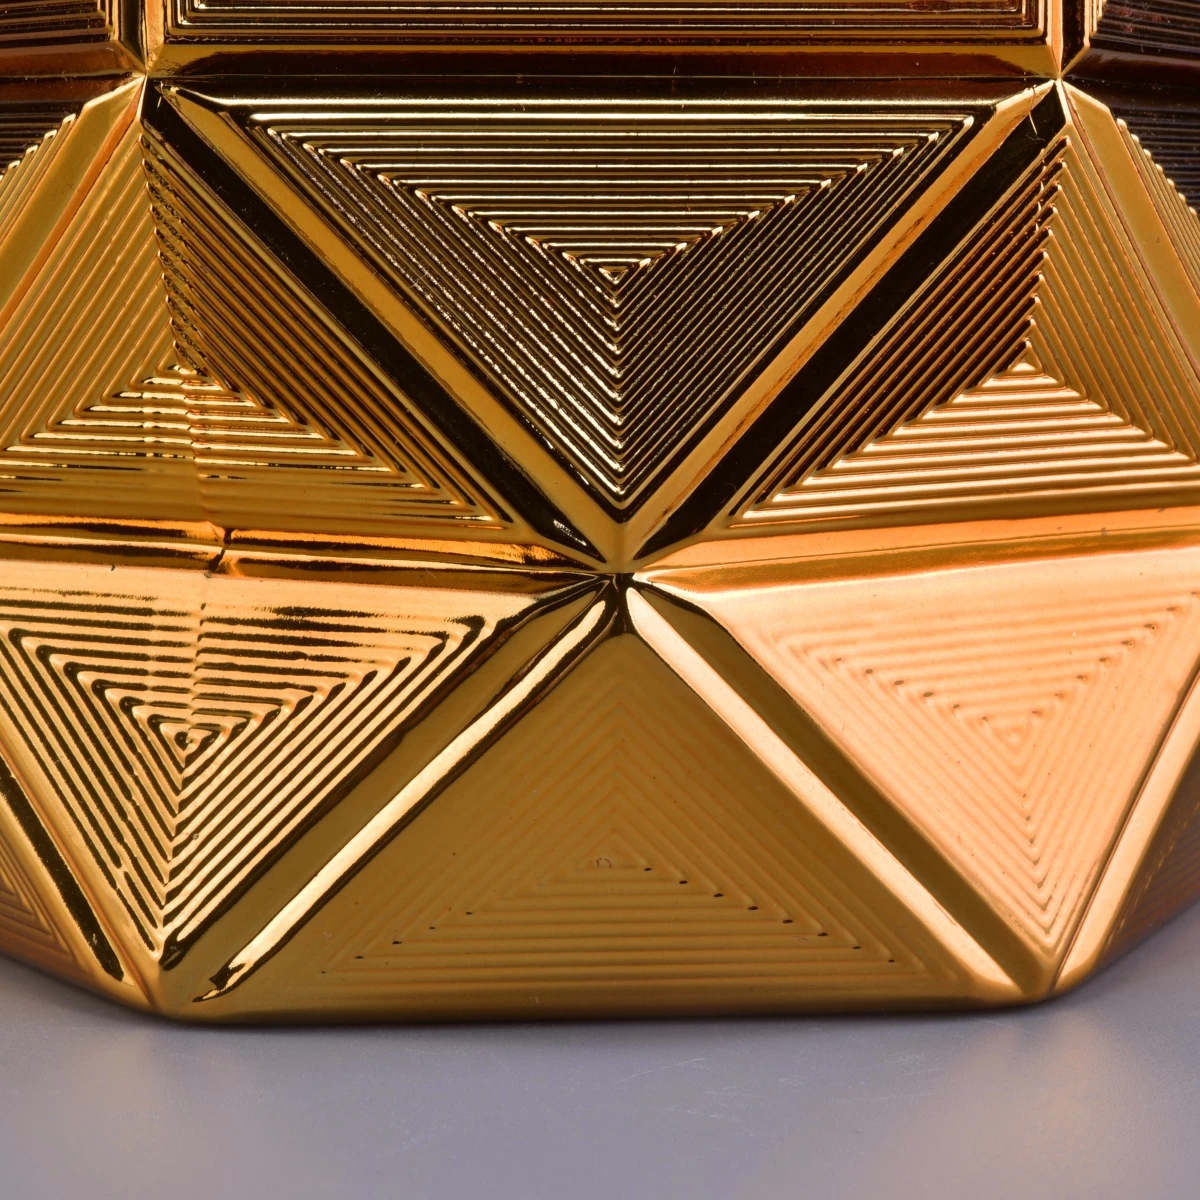 Sunny luxury decorative gold scented Hexagon glass candle jar holder